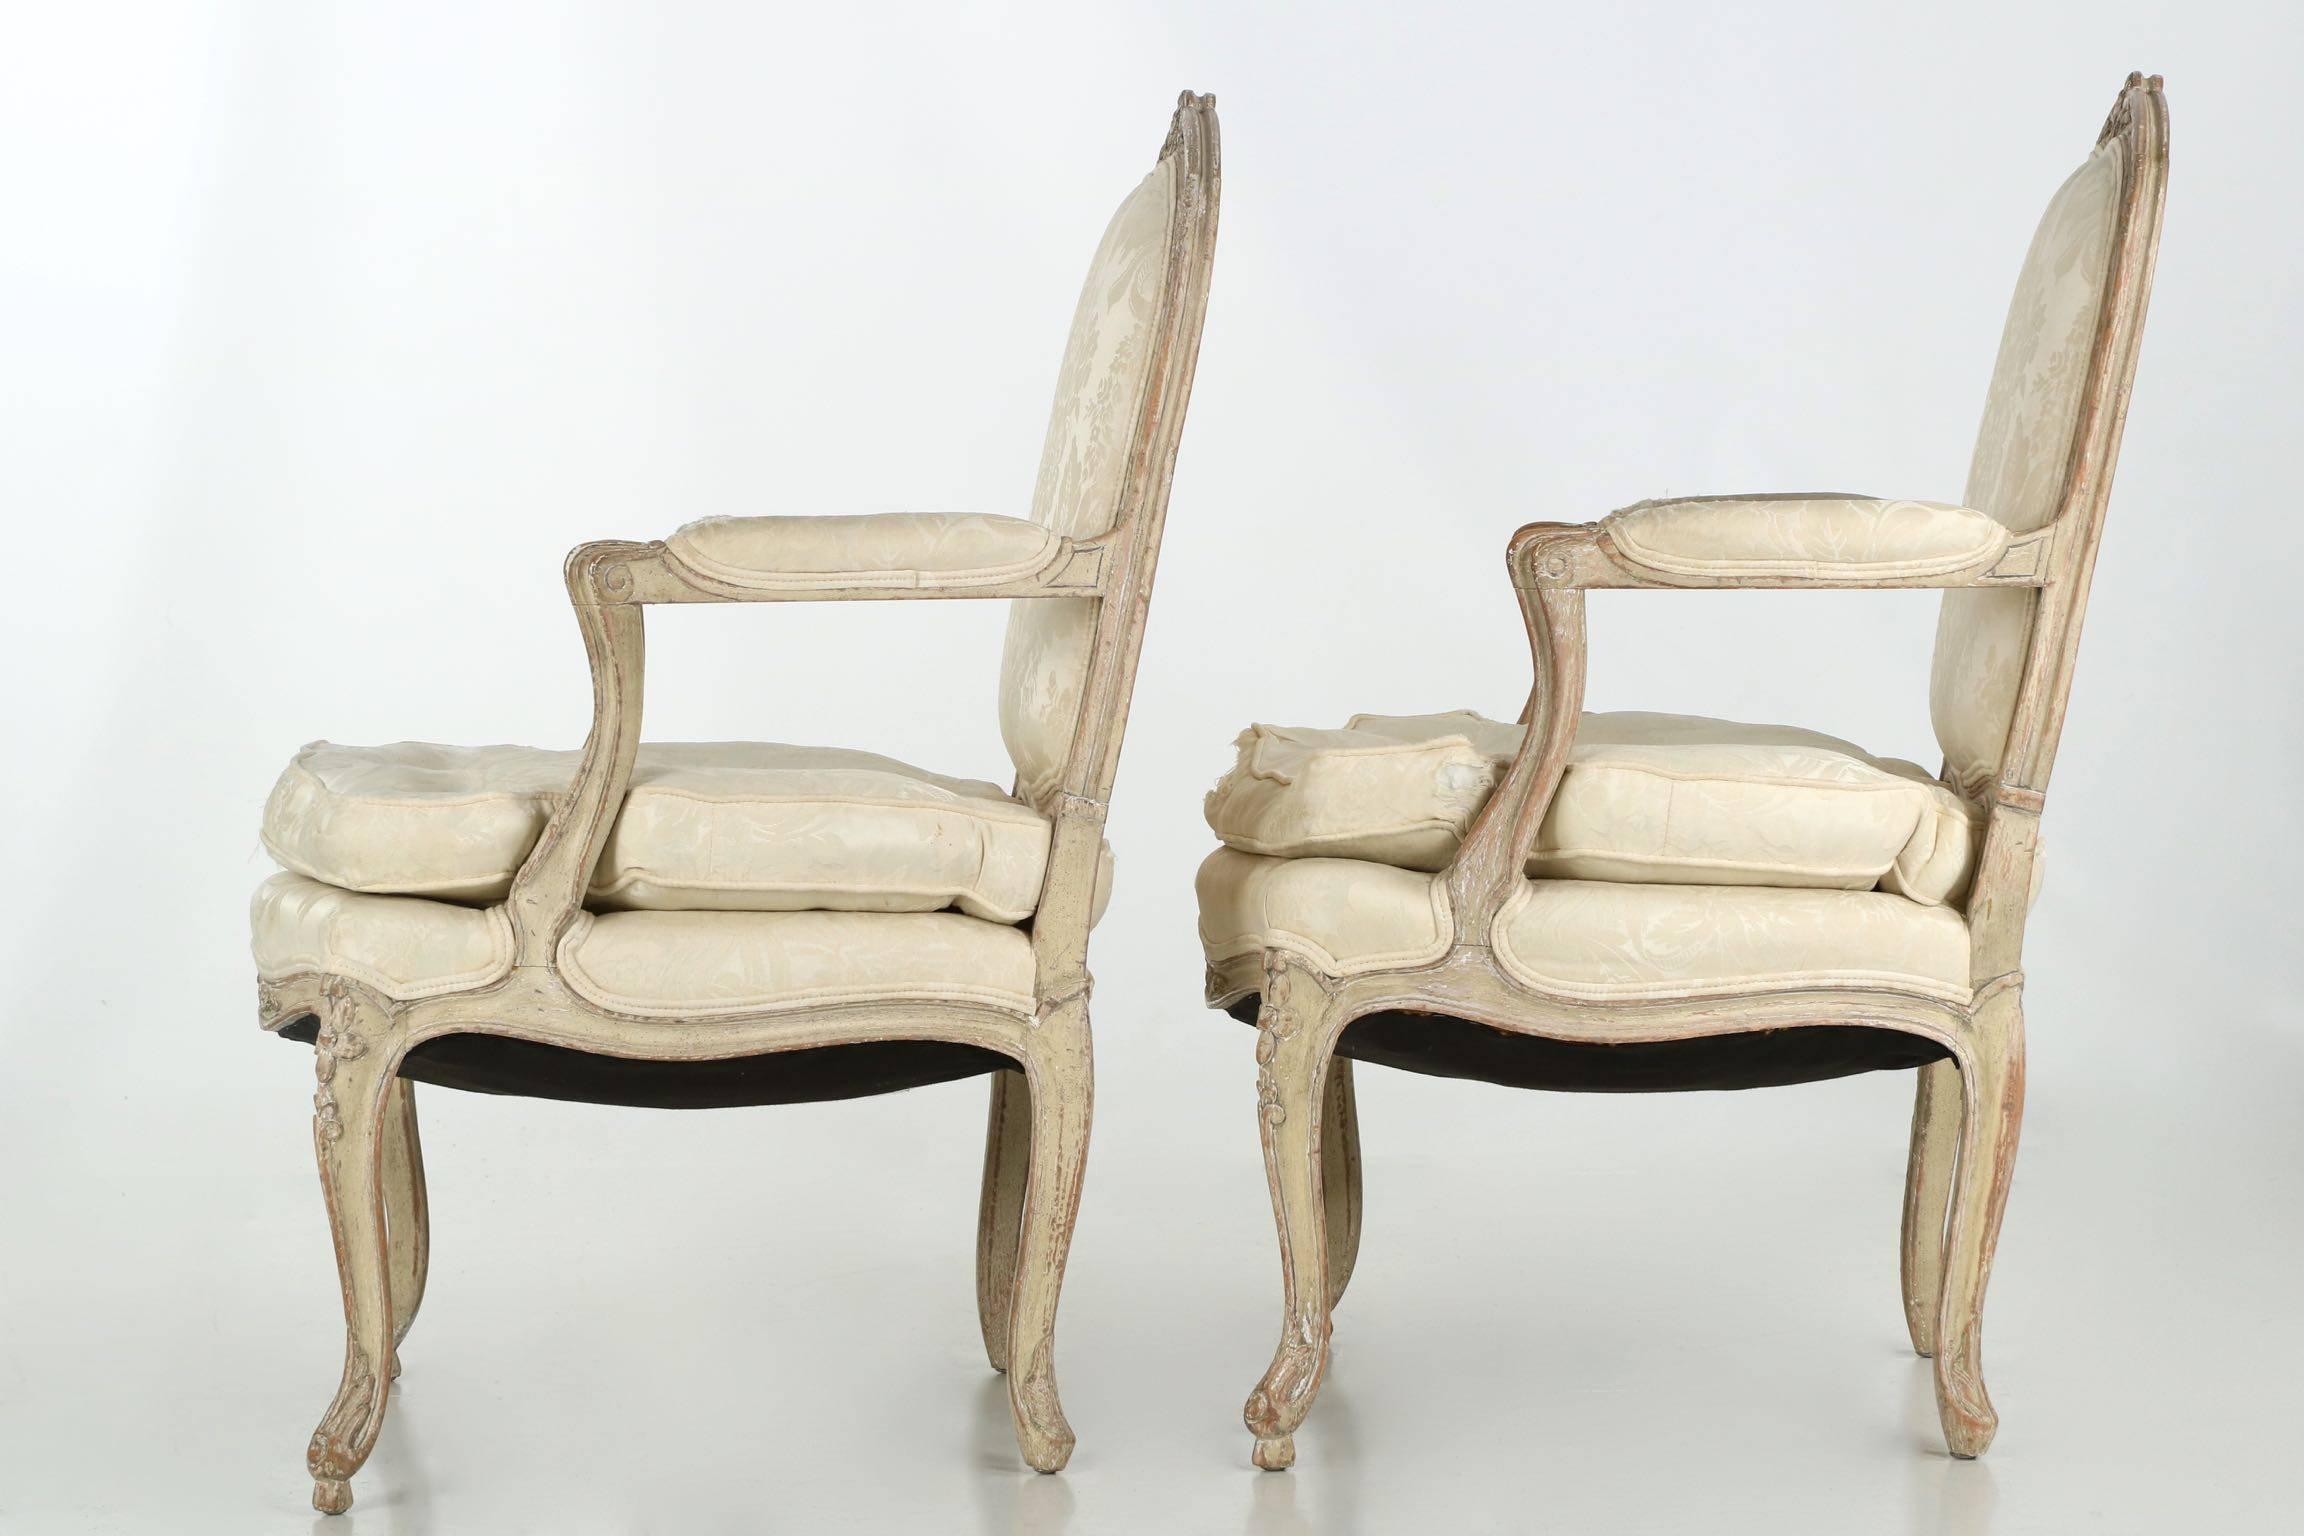 A quite attractive pair of vintage fauteuils probably crafted in the 1940s, they exhibit all of the carvings of the Louis XV period executed in relief along the crest and throughout the apron. The proportions are most comfortable and when they are